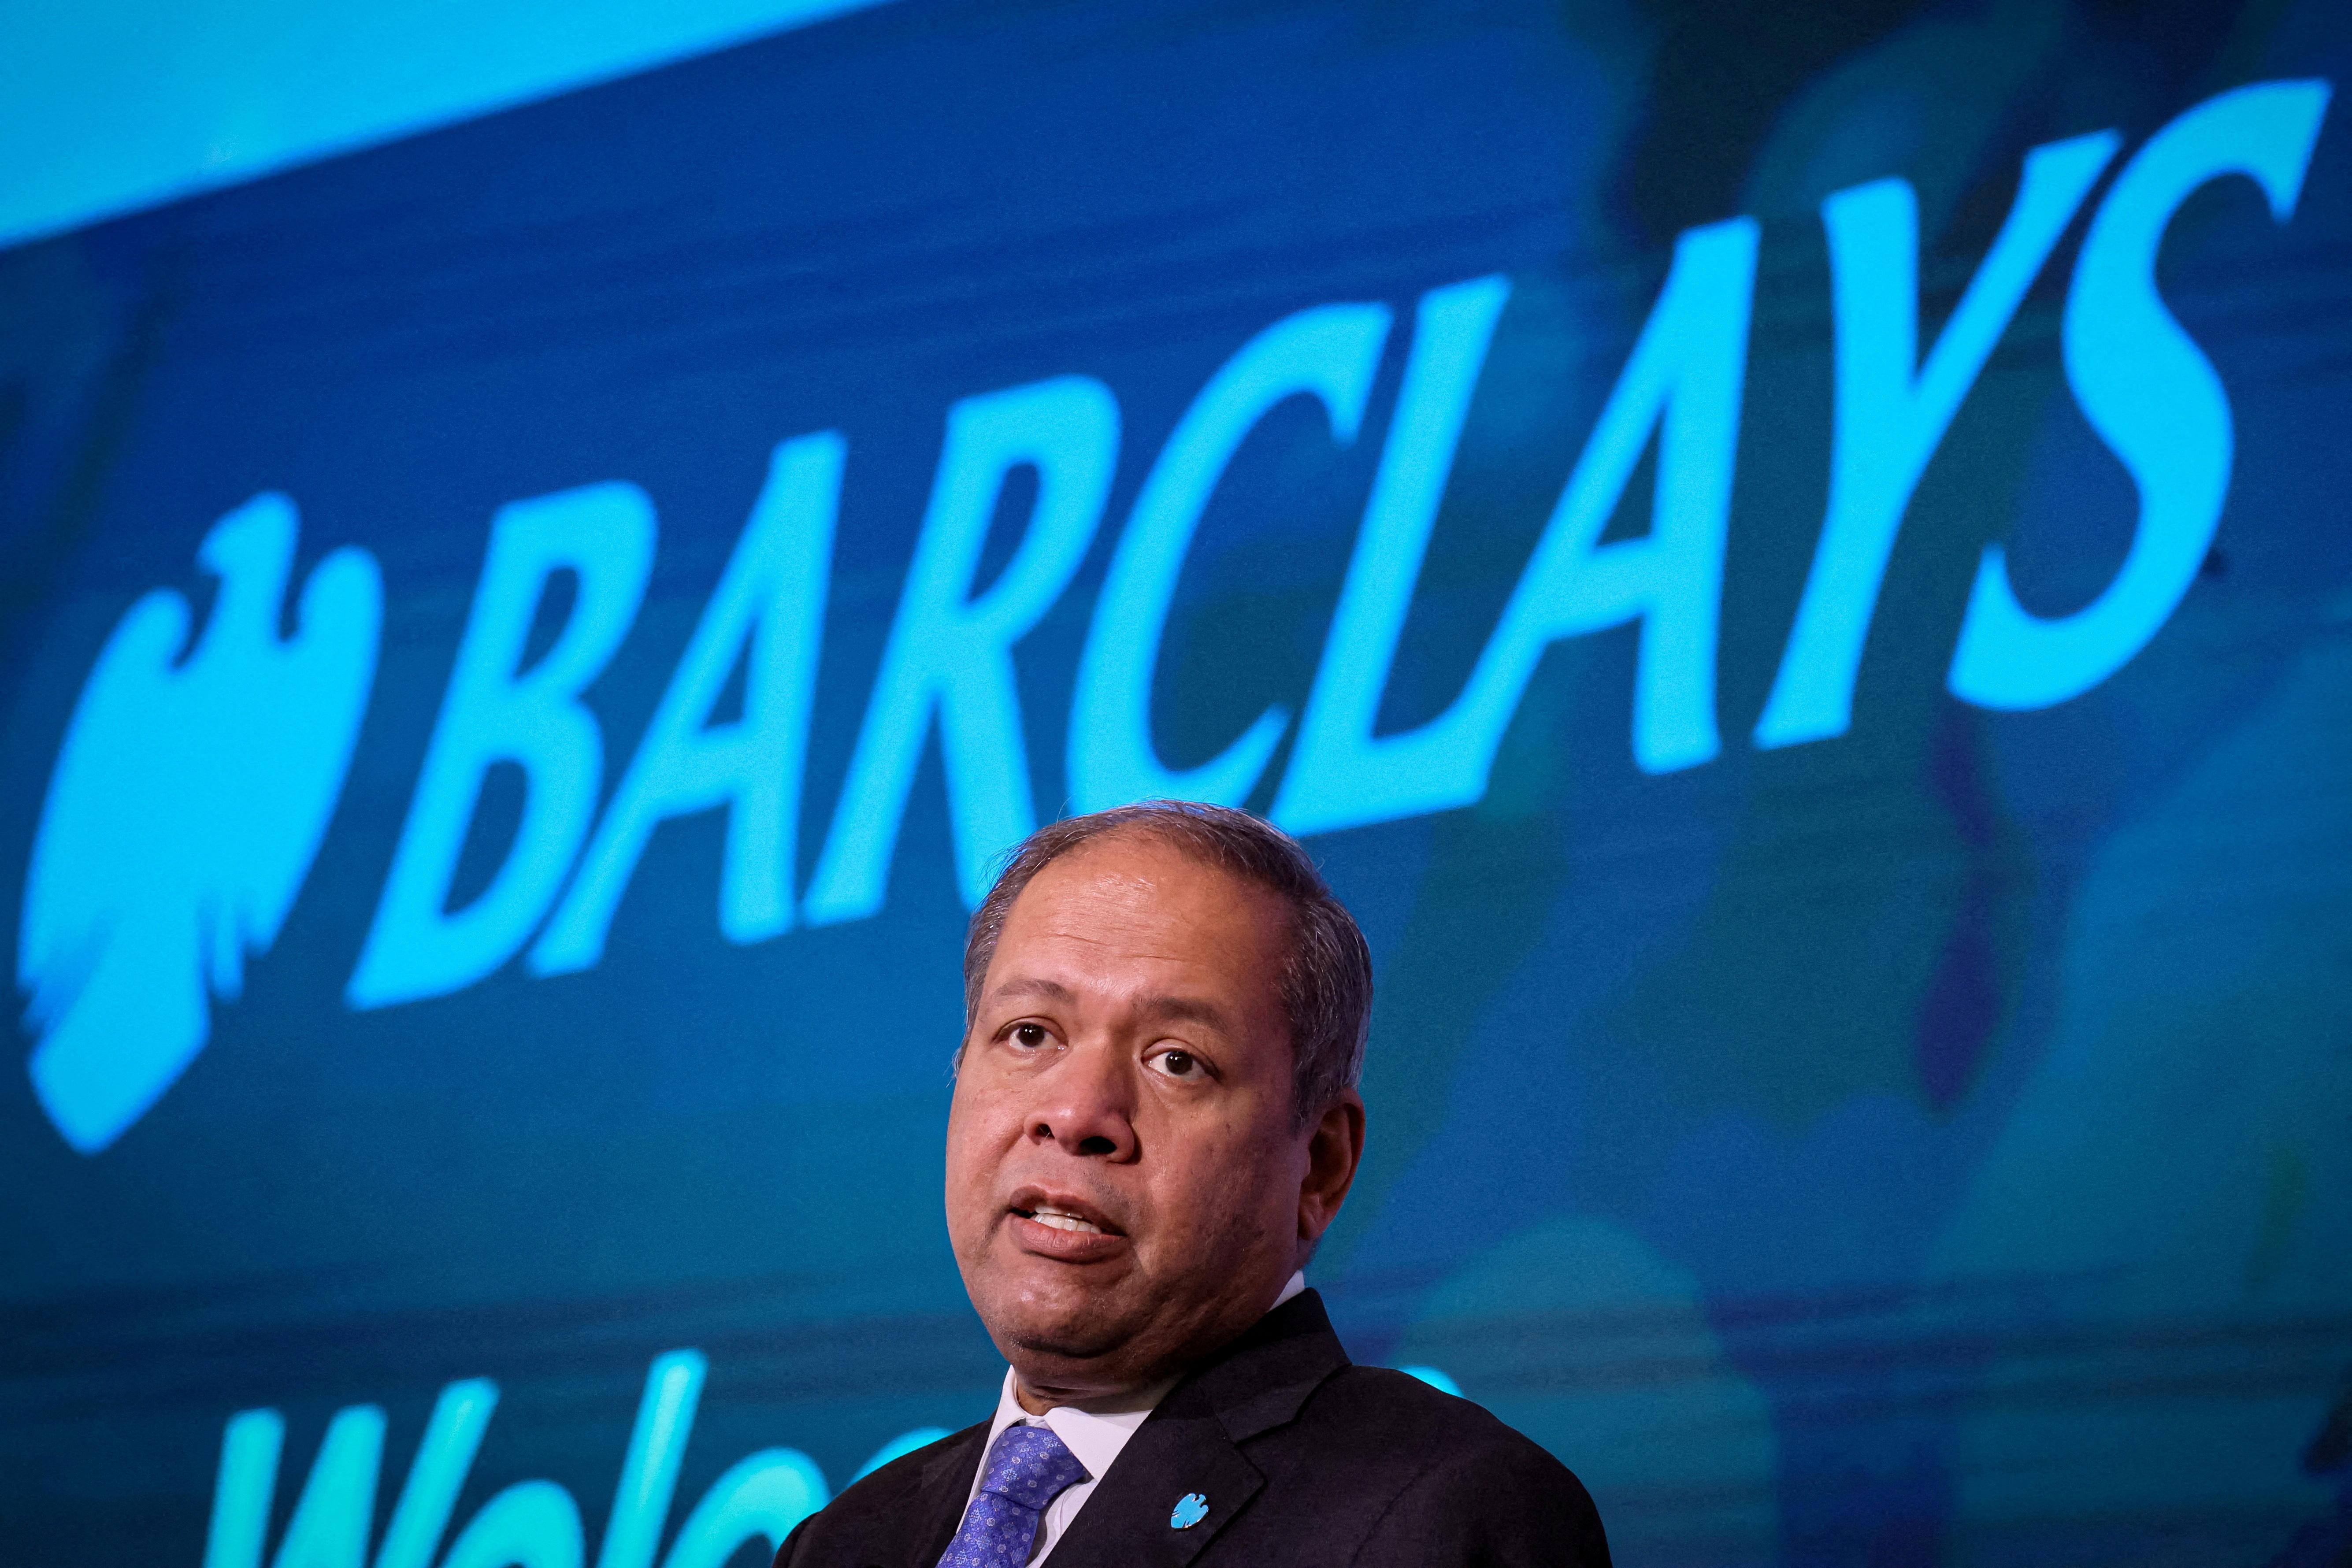 Barclays CEO C. S. Venkatakrishnan speaks during the Barclays Sustainable Finance conference in New York City